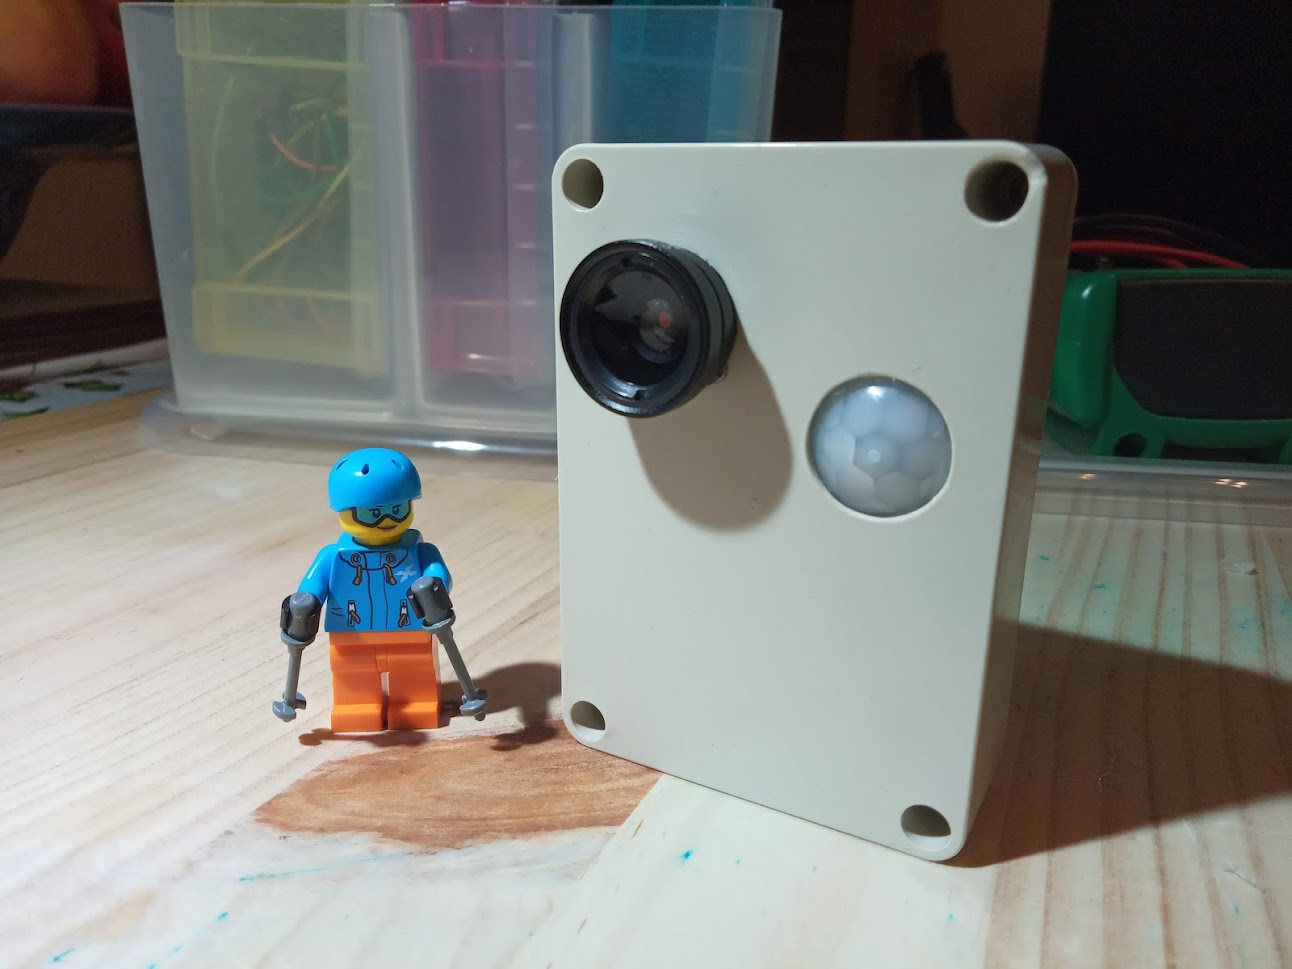 Camera trap with lego character for scale